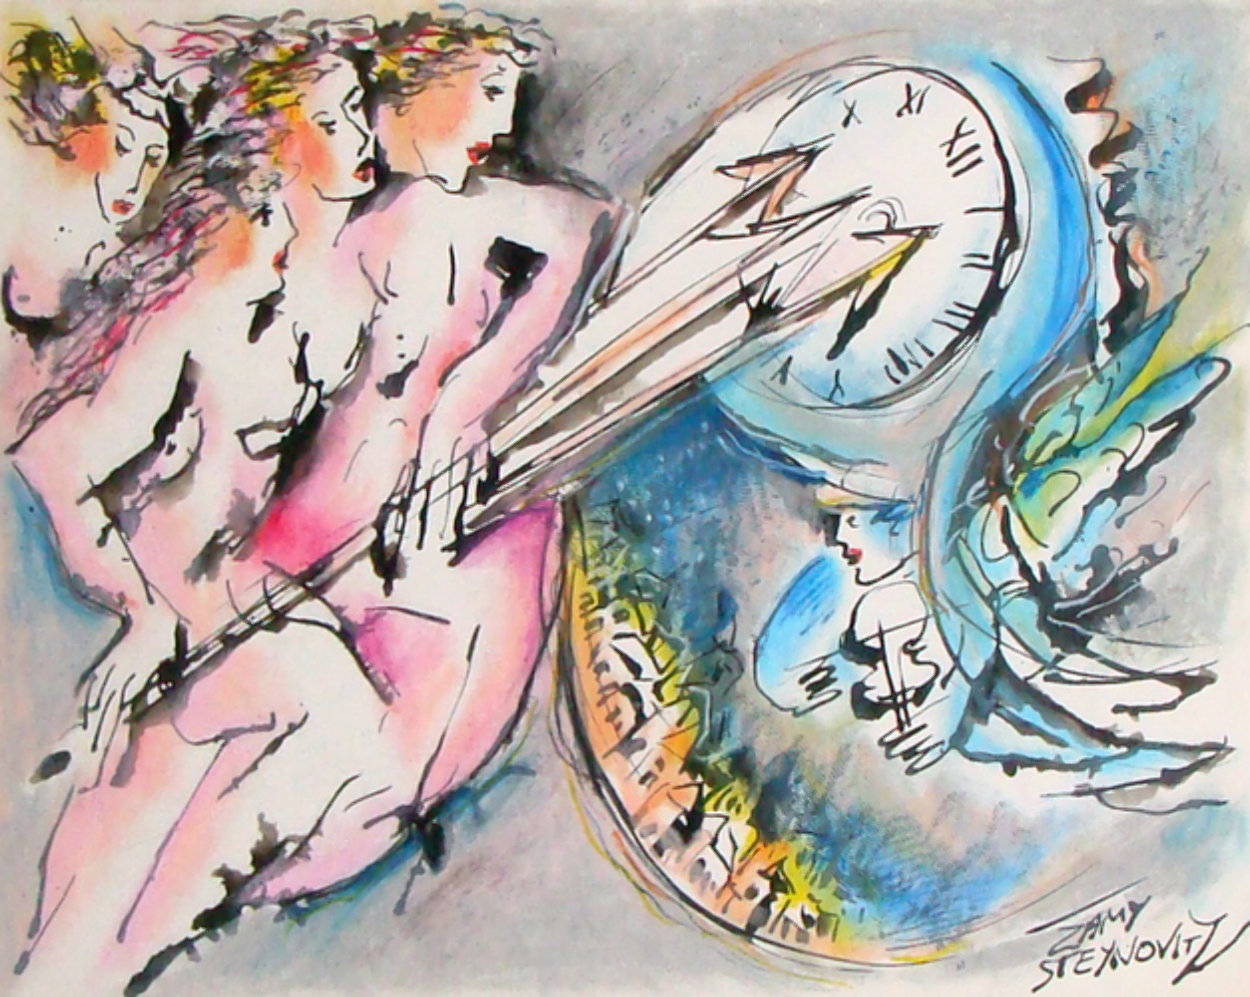 Chasing Peaceful Time Watercolor 1975 34x29 HS  Watercolor by Zamy Steynovitz